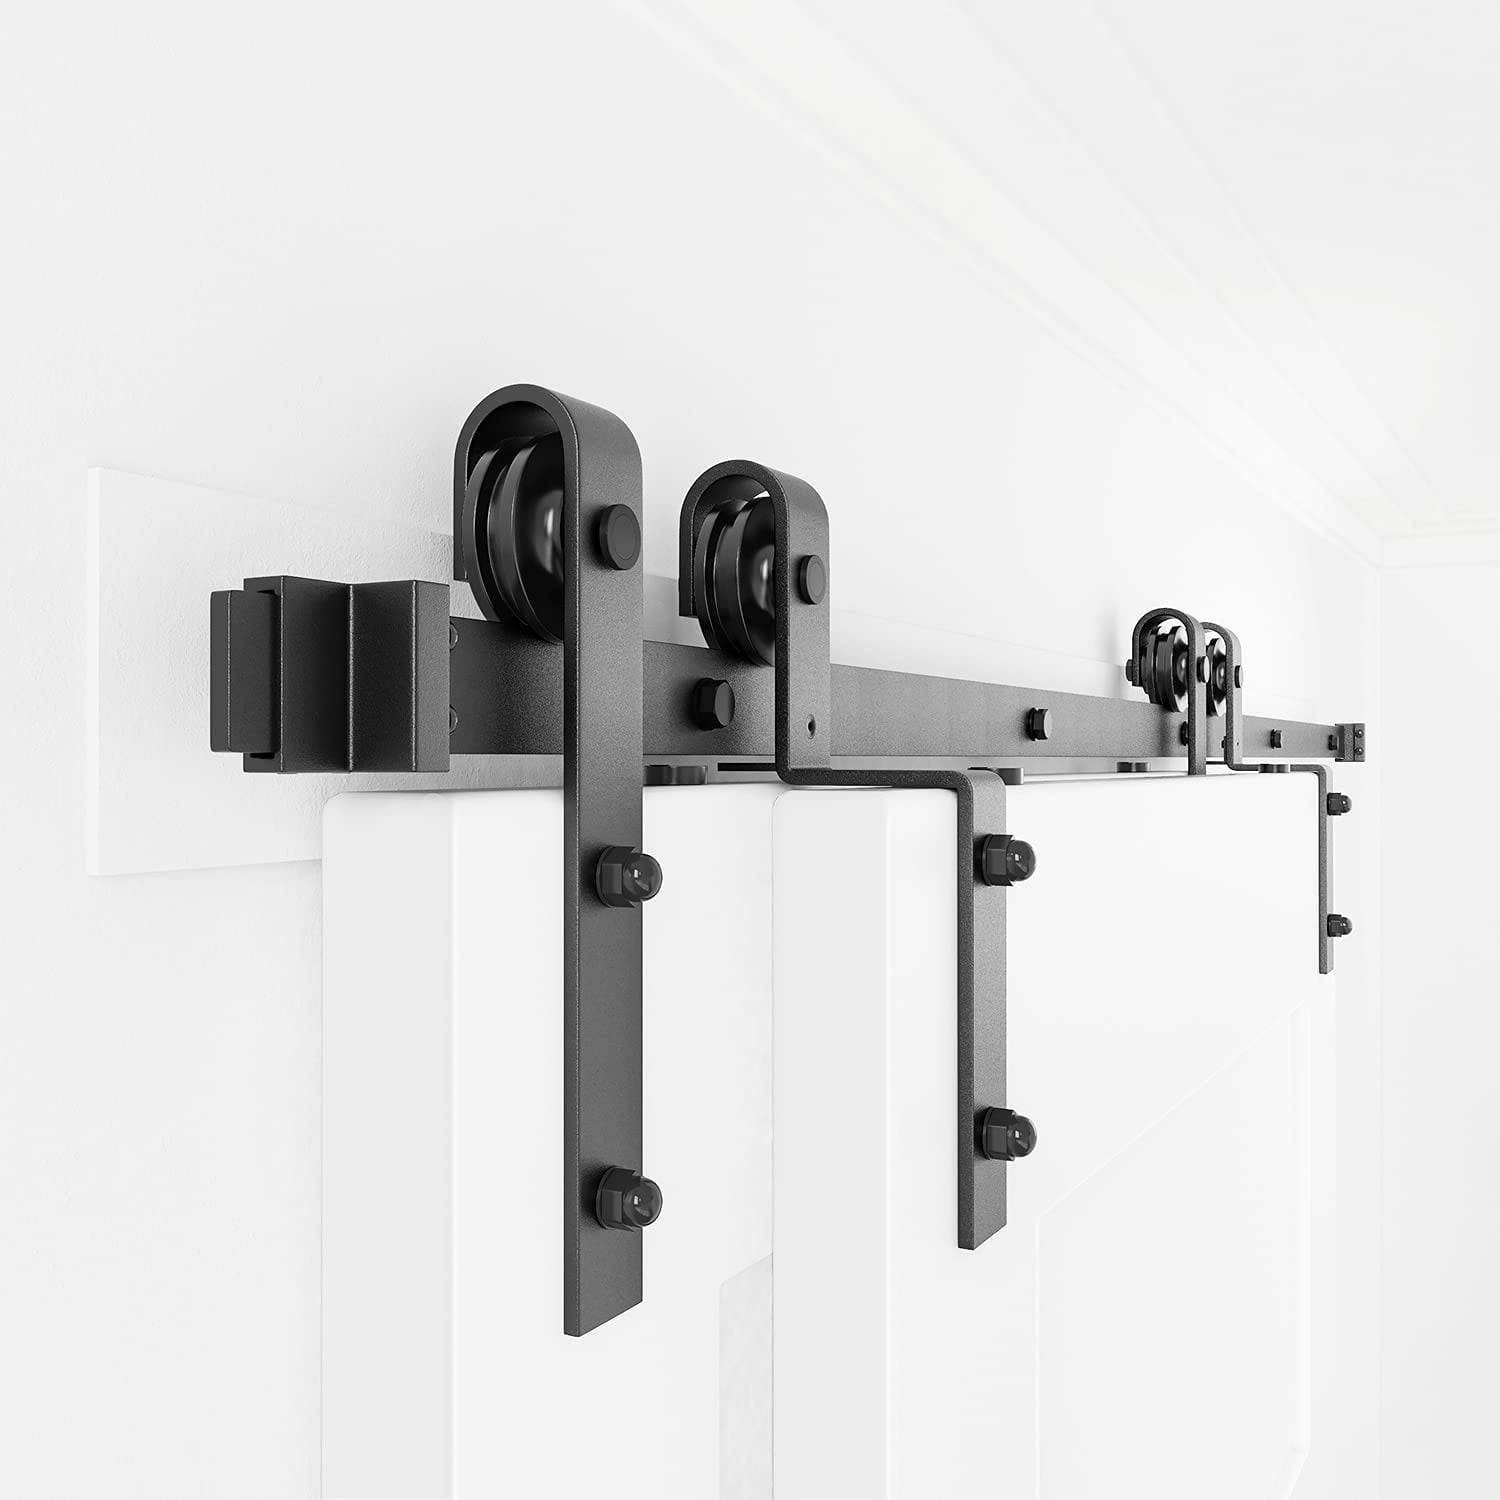 I Shape Design Single Track Bypass System 2 Pcs Hangers Hardware Accessories WINSOON Sliding Barn Door Hardware Rollers 